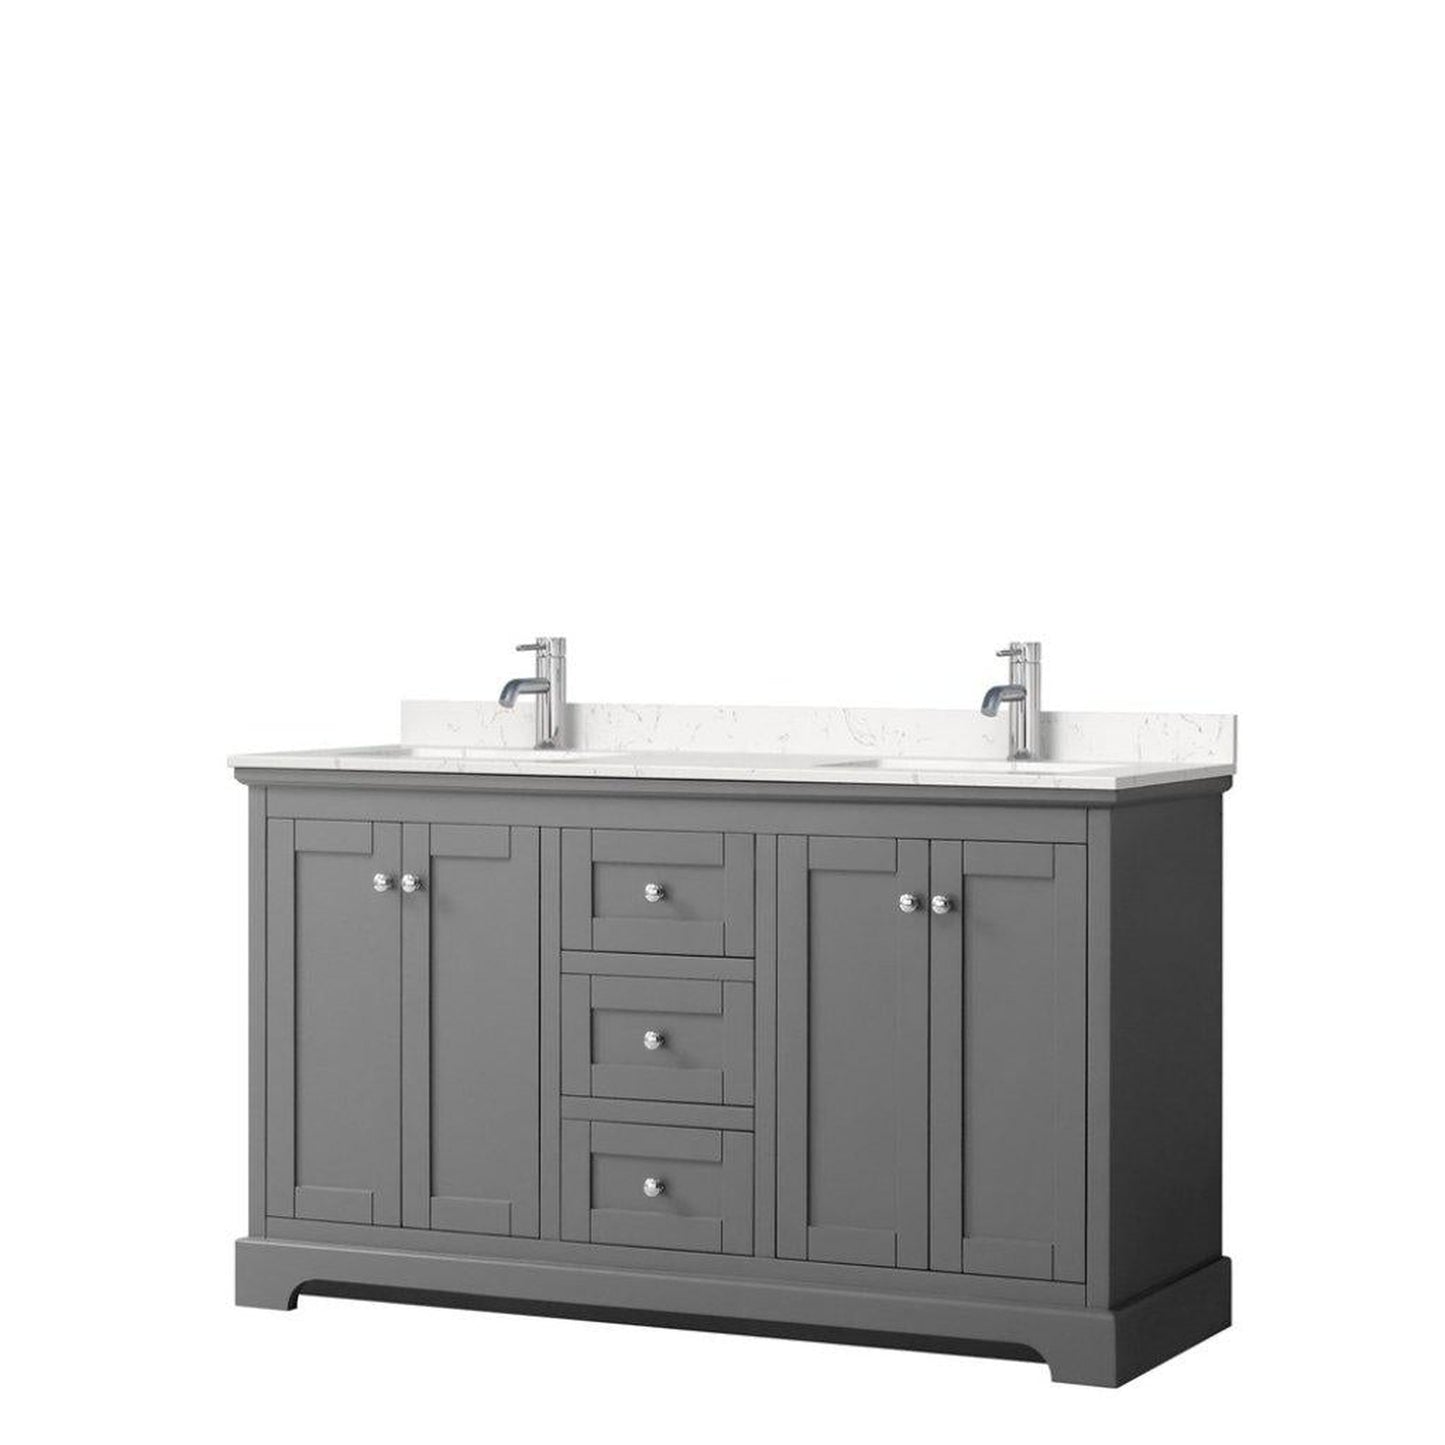 Wyndham Collection Avery 60" Dark Gray Double Bathroom Vanity With Light-Vein Cultured Marble Countertop With 1-Hole Faucet And Square Sink